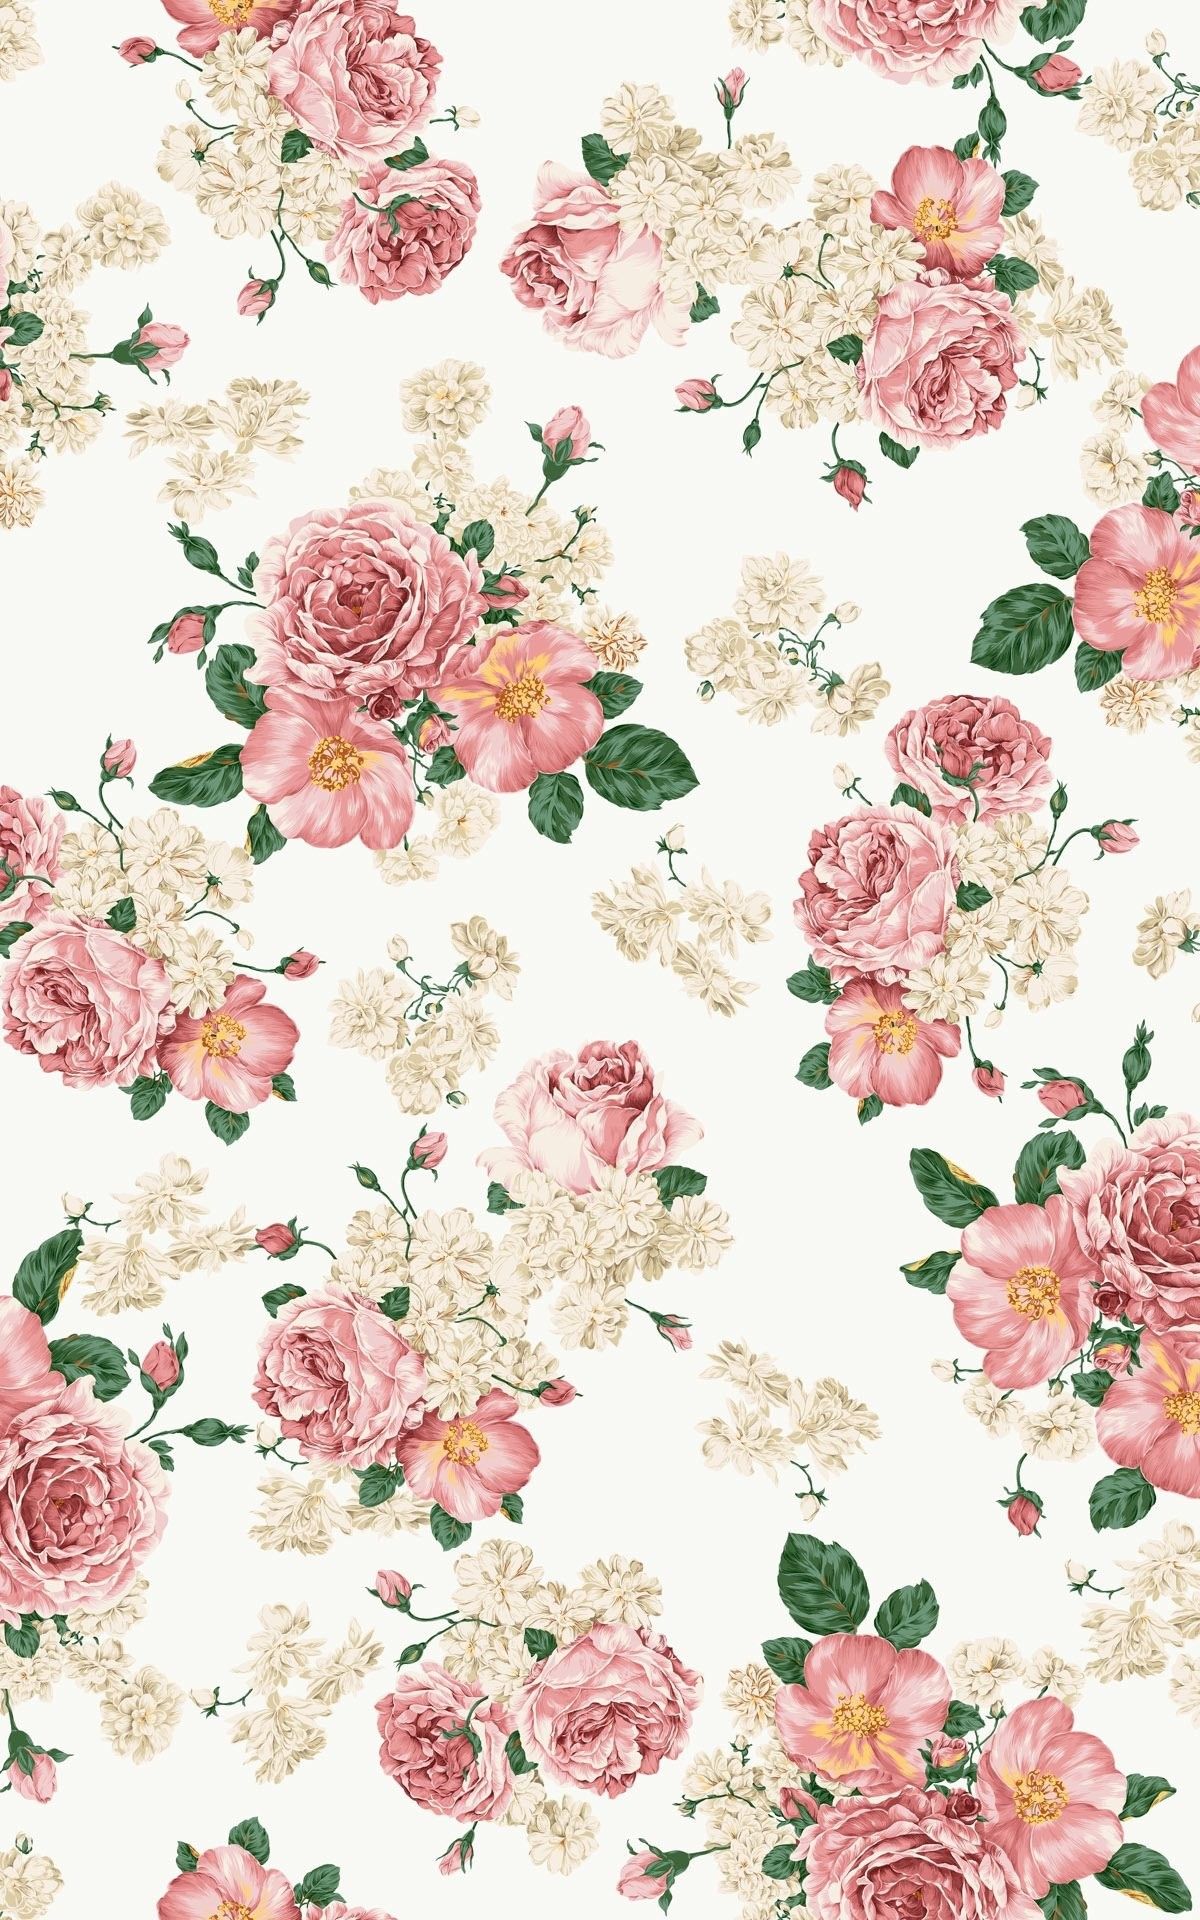 Floral Ipad Wallpapers